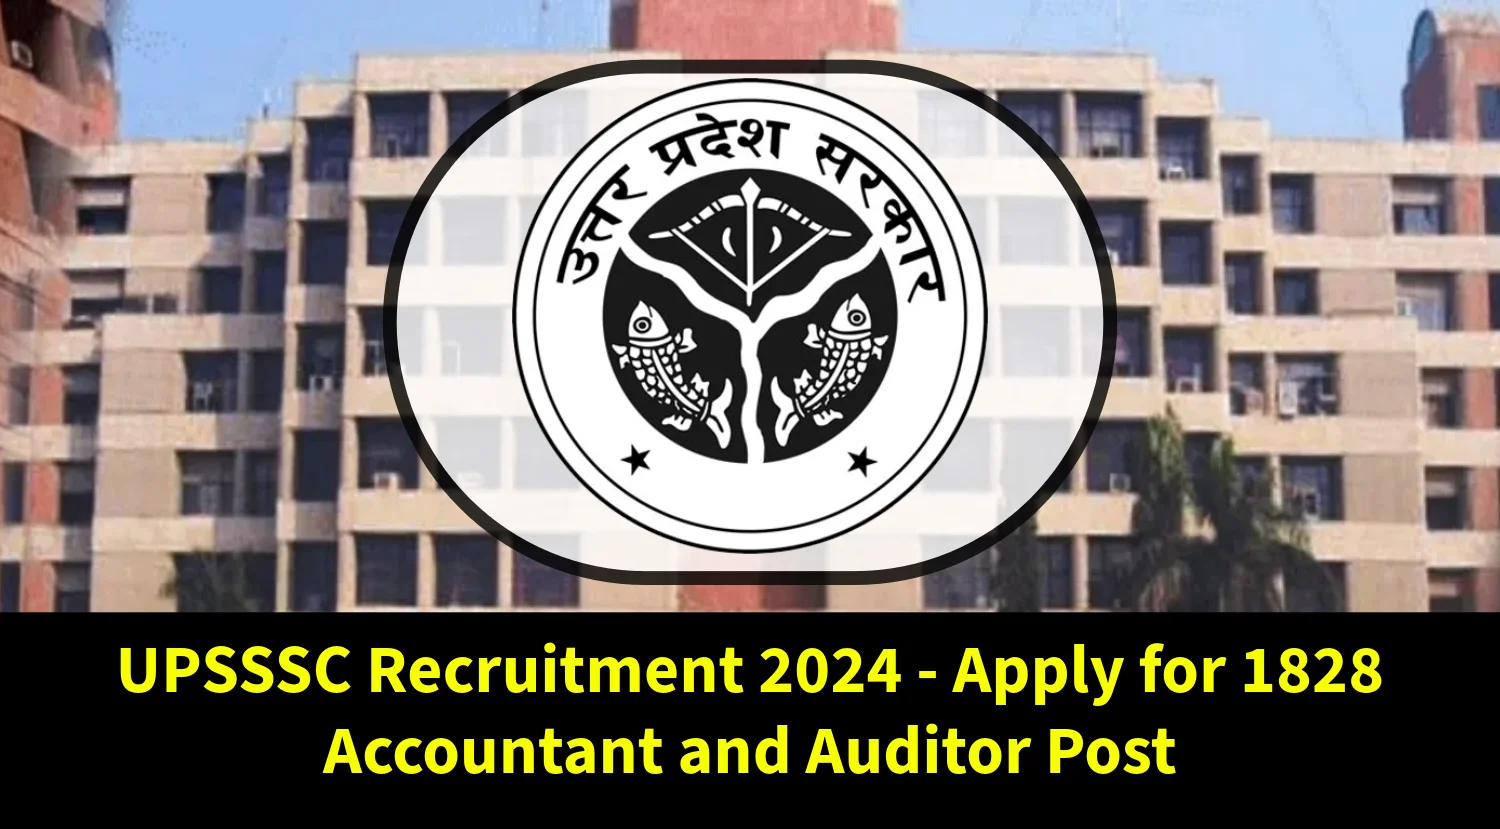 UPSSSC Recruitment 2024 Apply for 1828 Accountant and Auditor Post